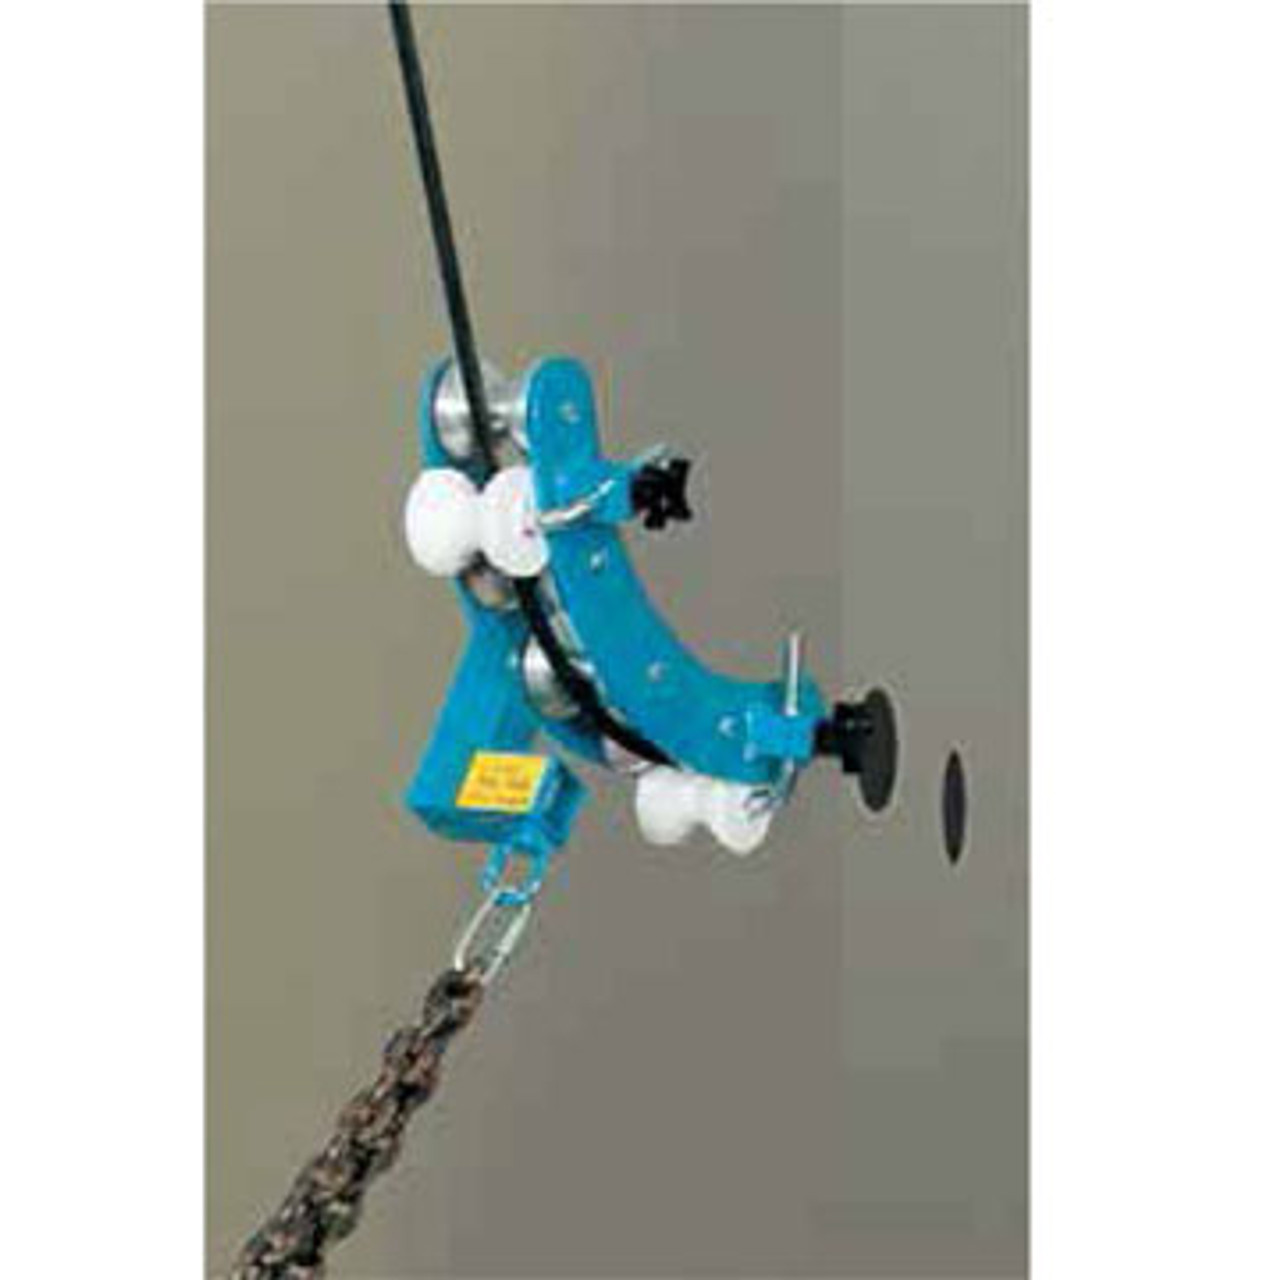 The Condux 08539550 Fiber Optic Hanger Block can be used in a manhole or hung on a pole for easier pulls.  The fiber optic hanger block has five aluminum rollers on bronze bearings which allows making a 90 degree turn easy.